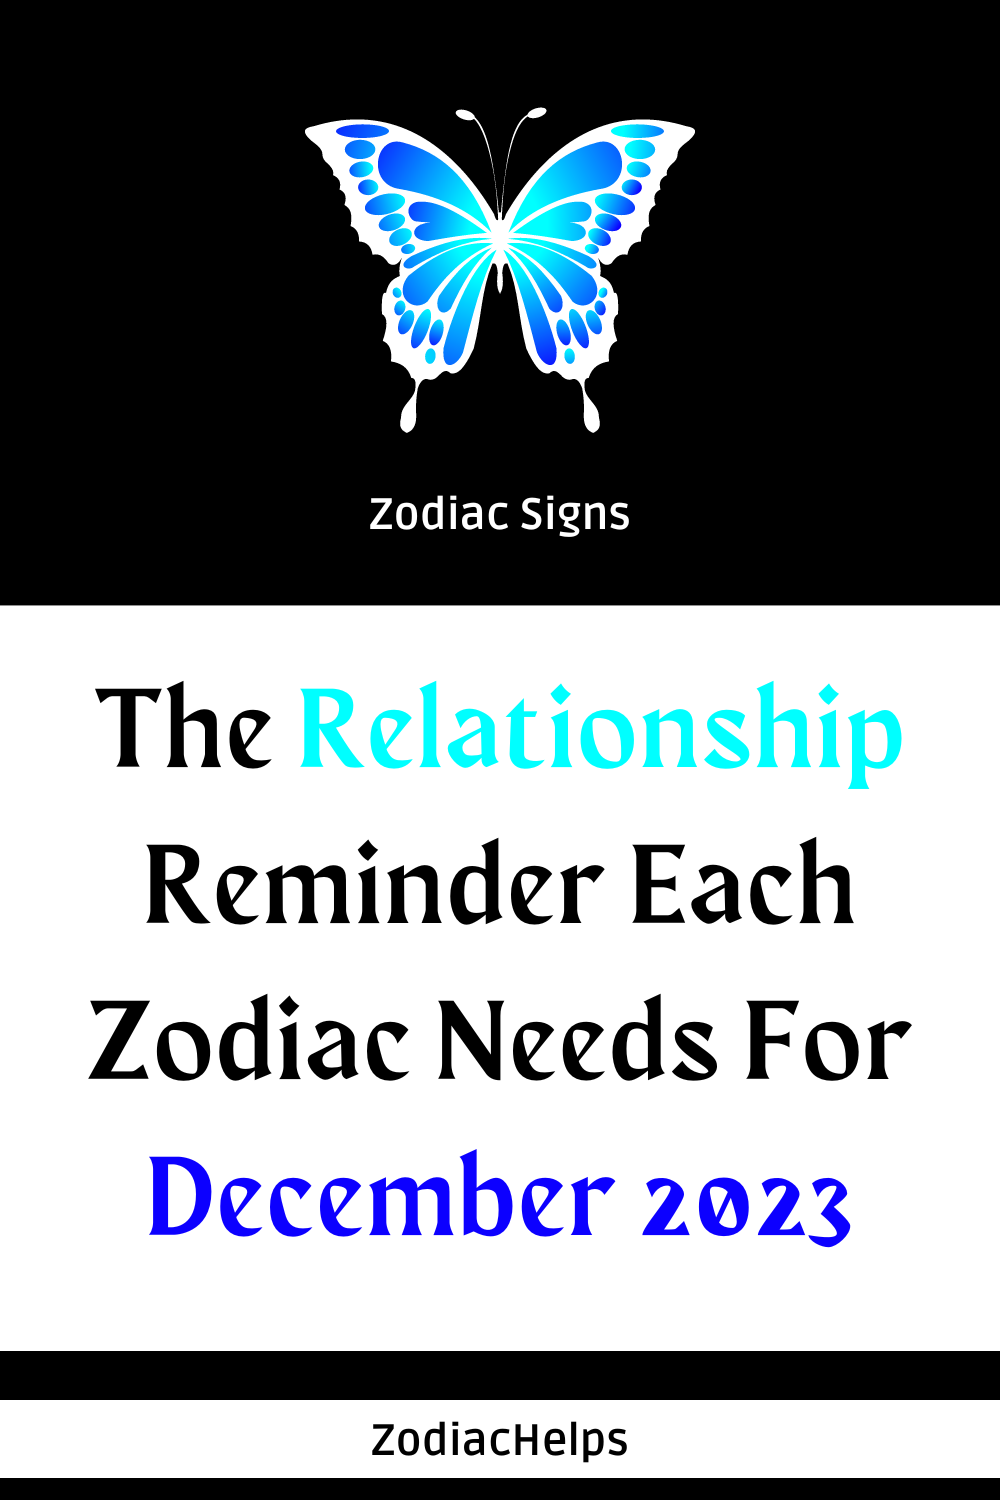 The Relationship Reminder Each Zodiac Needs For December 2023